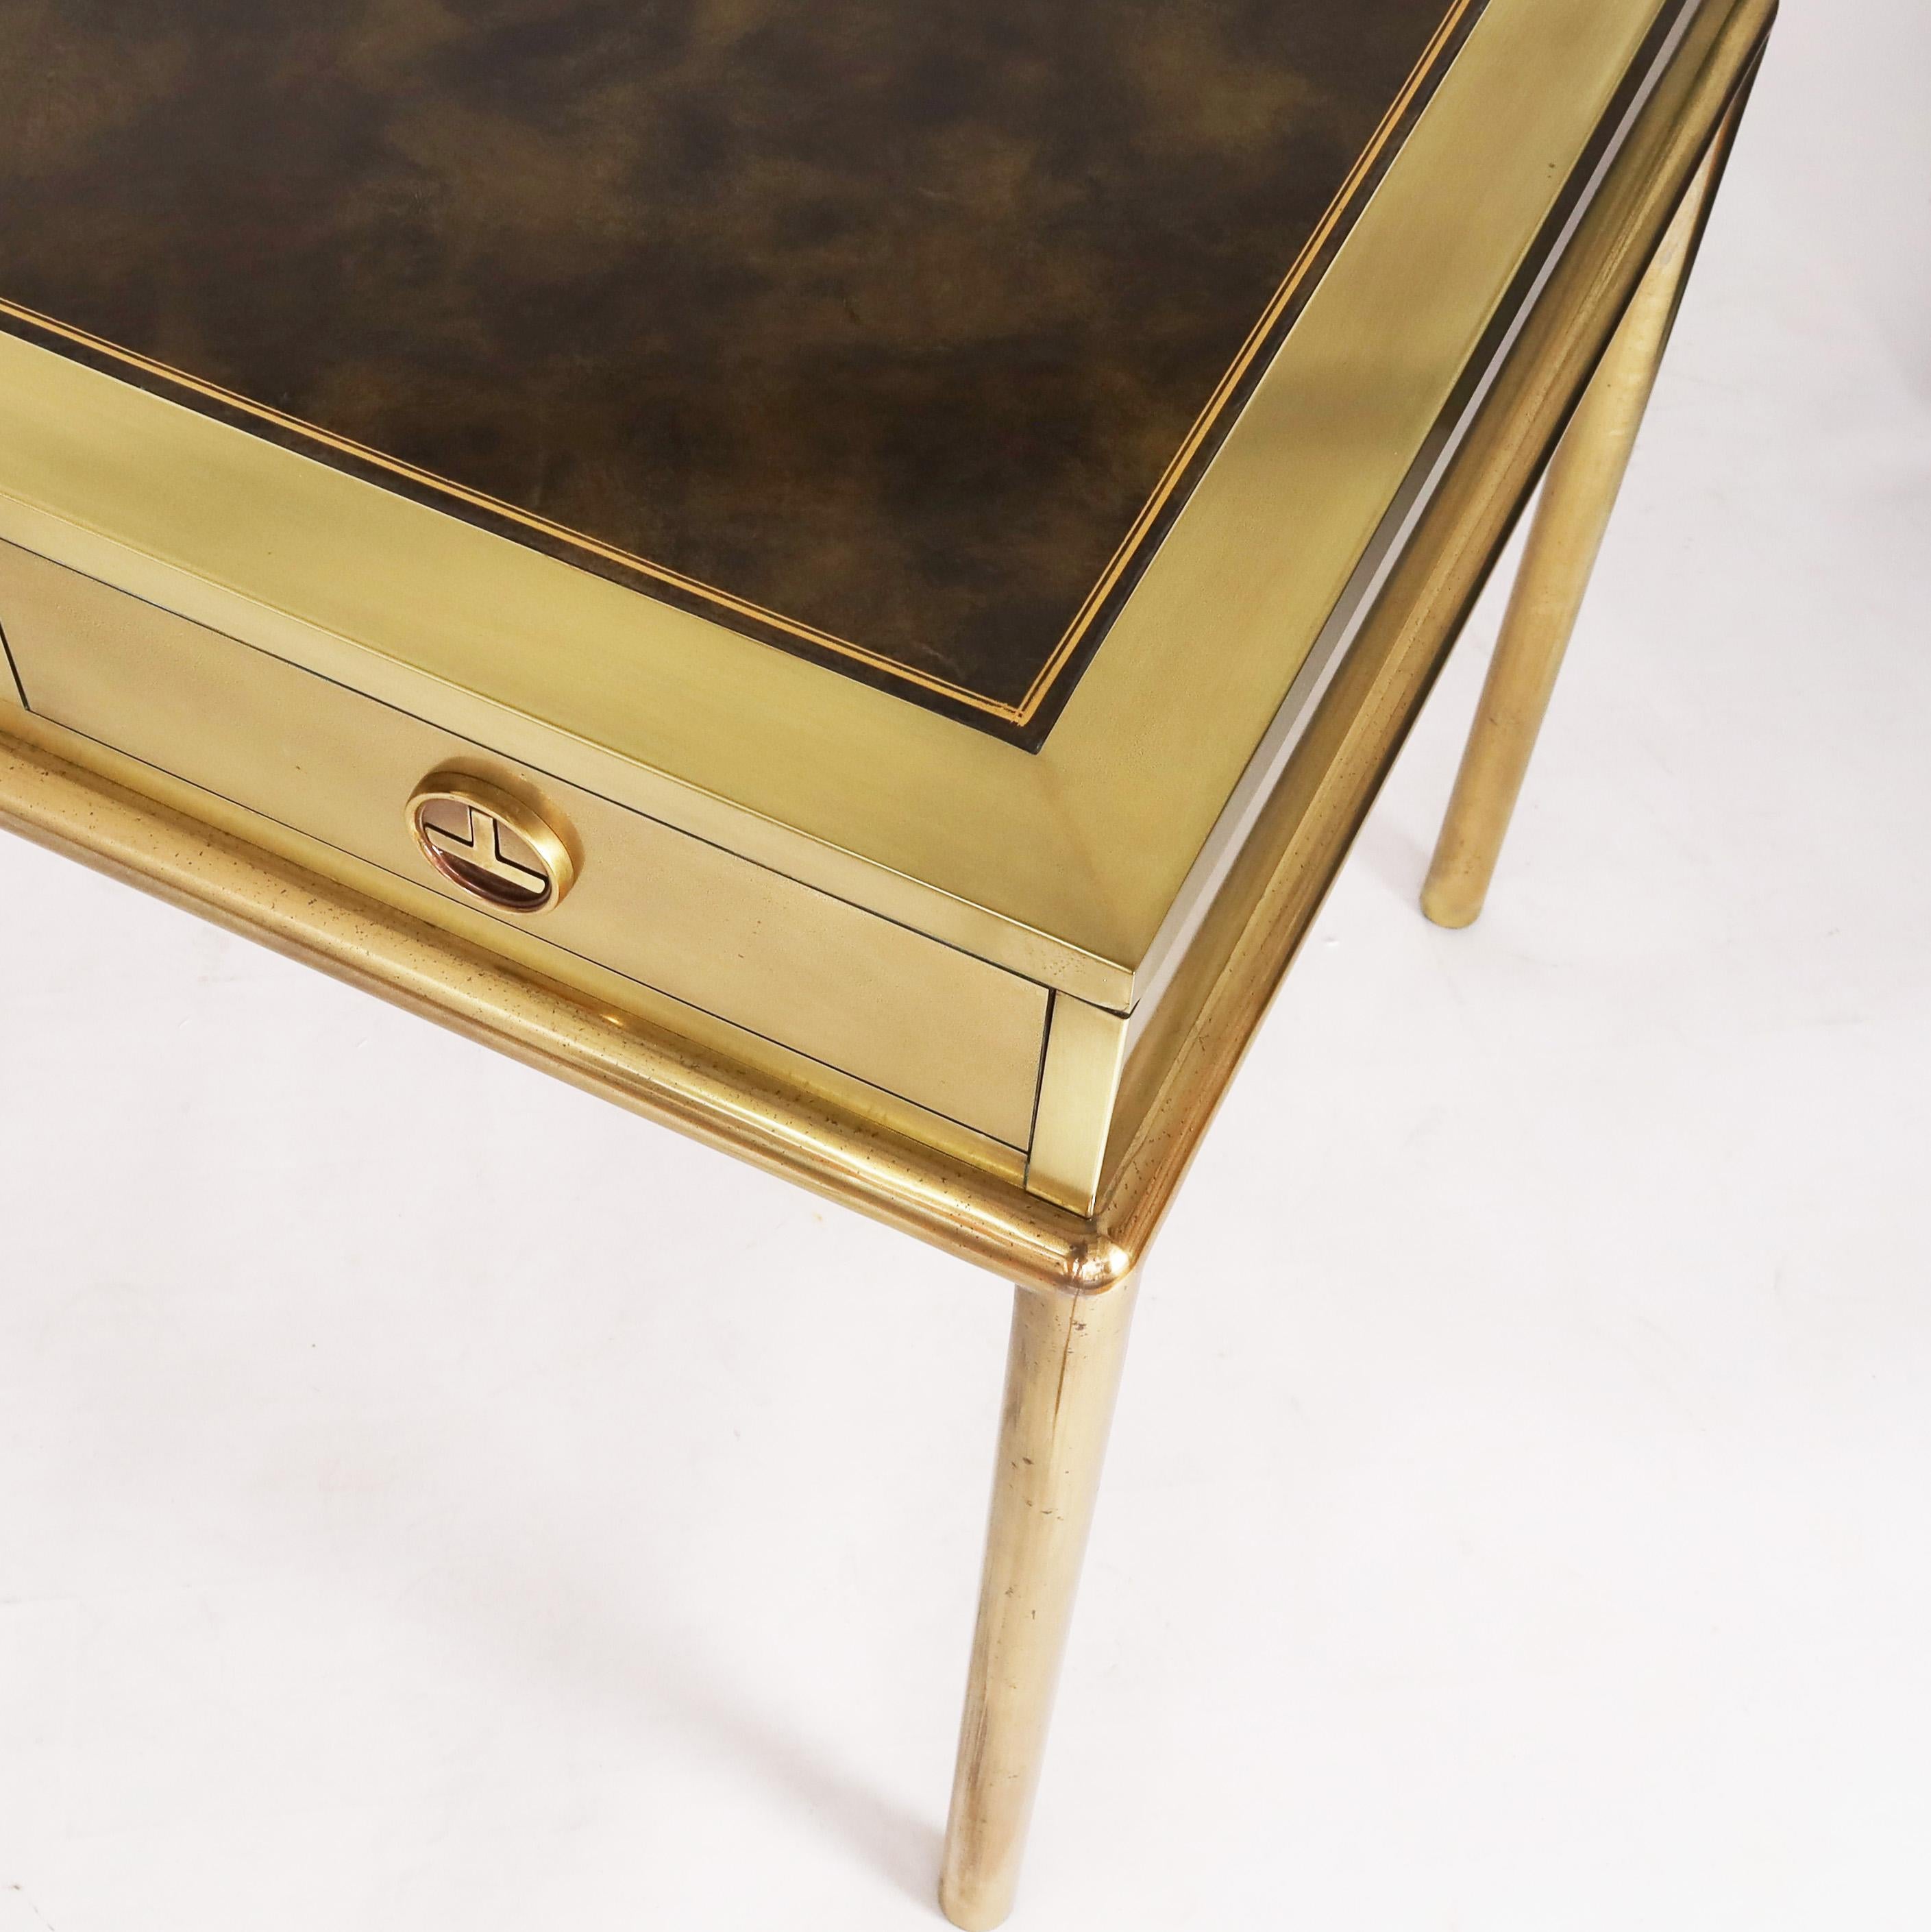 Mastercraft Mid Century Leather Top Brass Desk In Good Condition For Sale In Palm Beach, FL